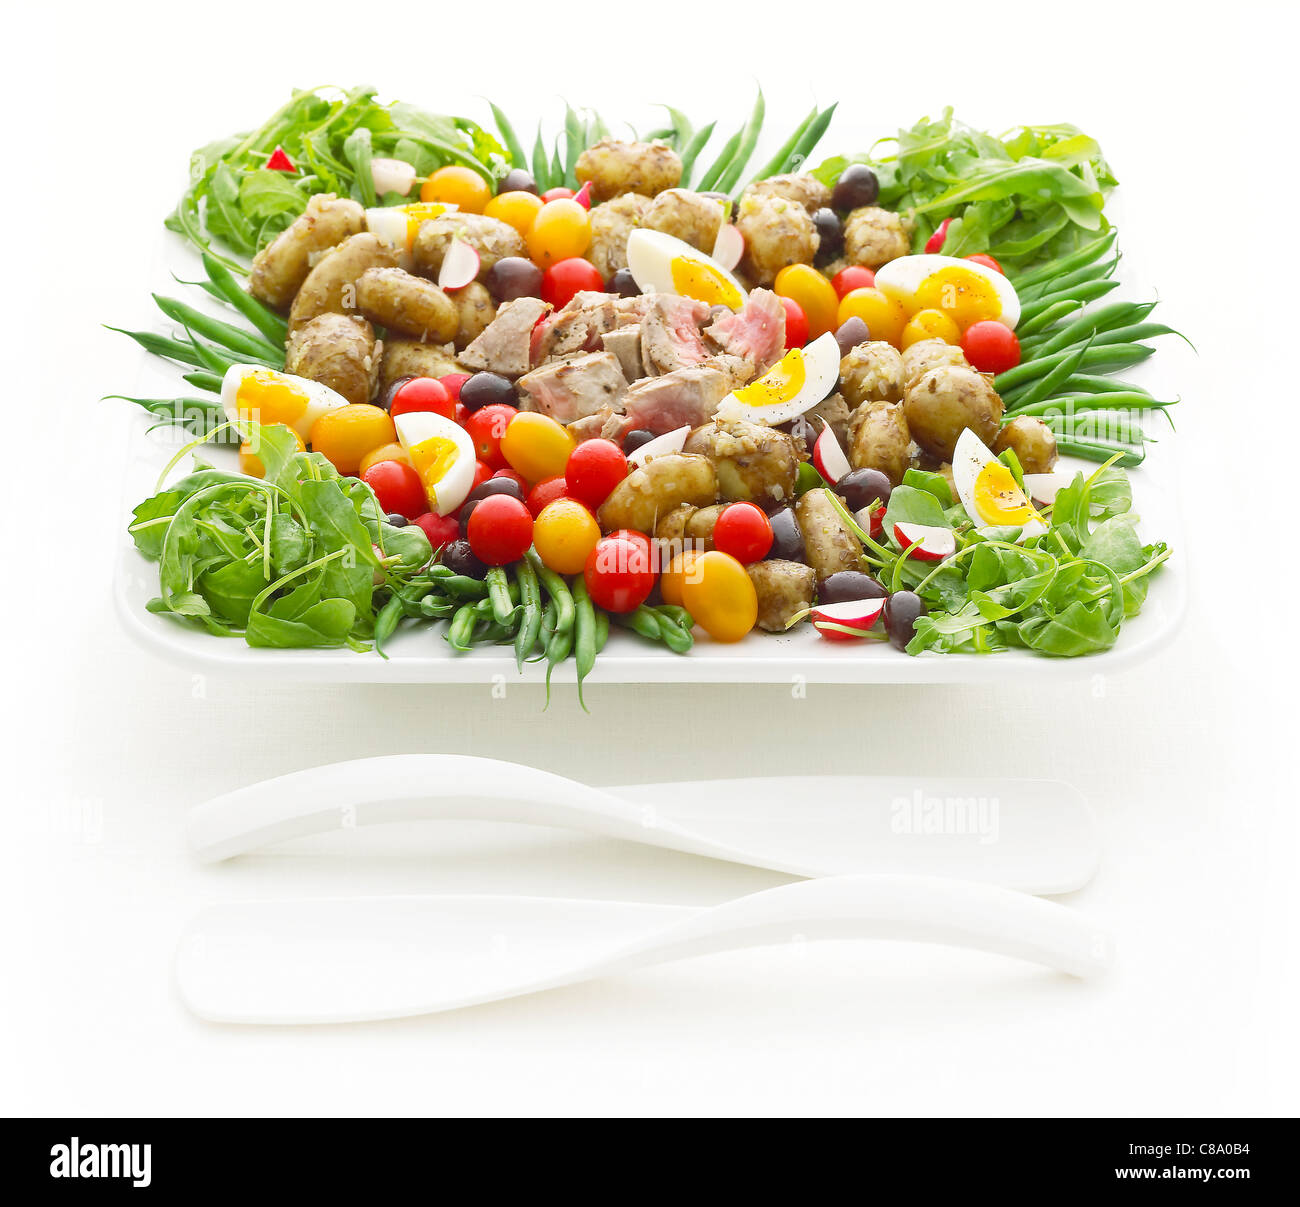 Tuna Niscoise Salad in a white serving bowl Stock Photo